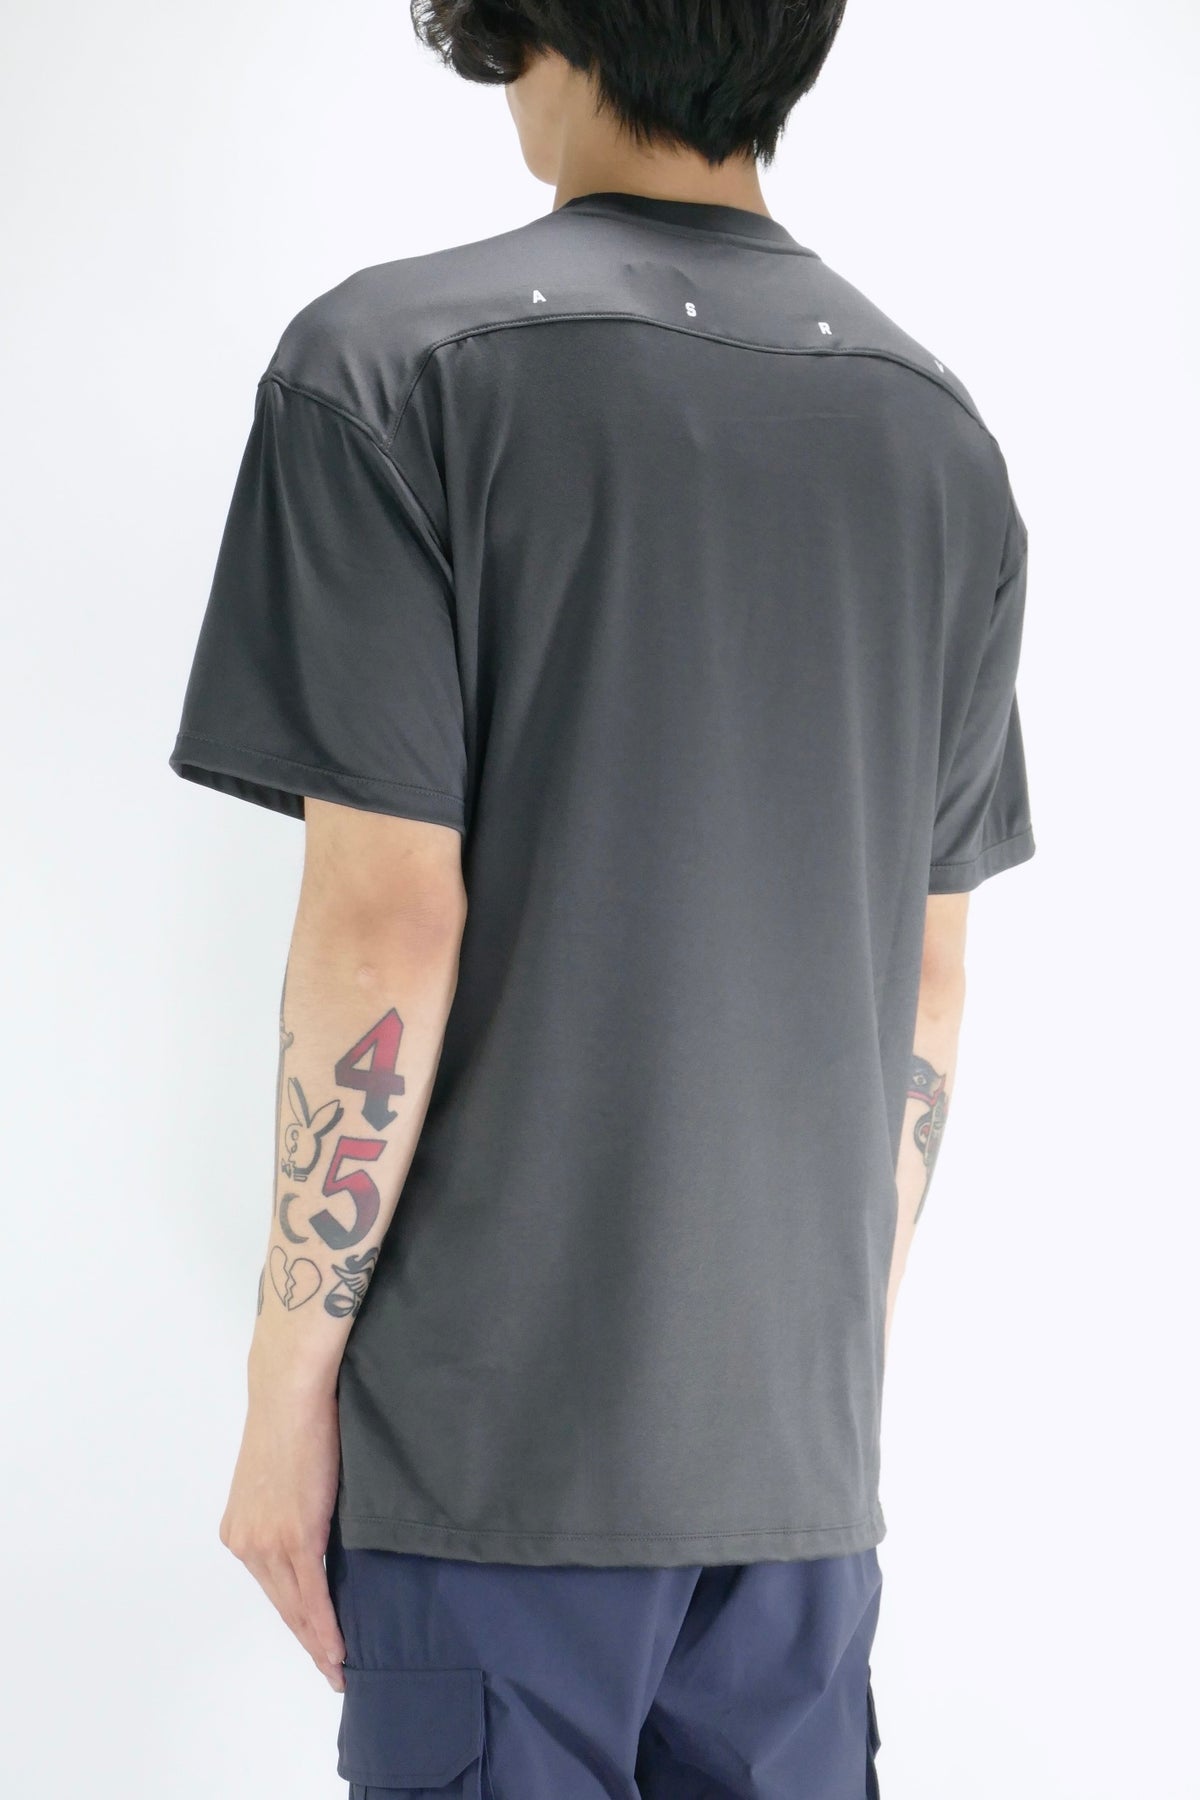 ASRV Core Oversized Tee - Space Grey